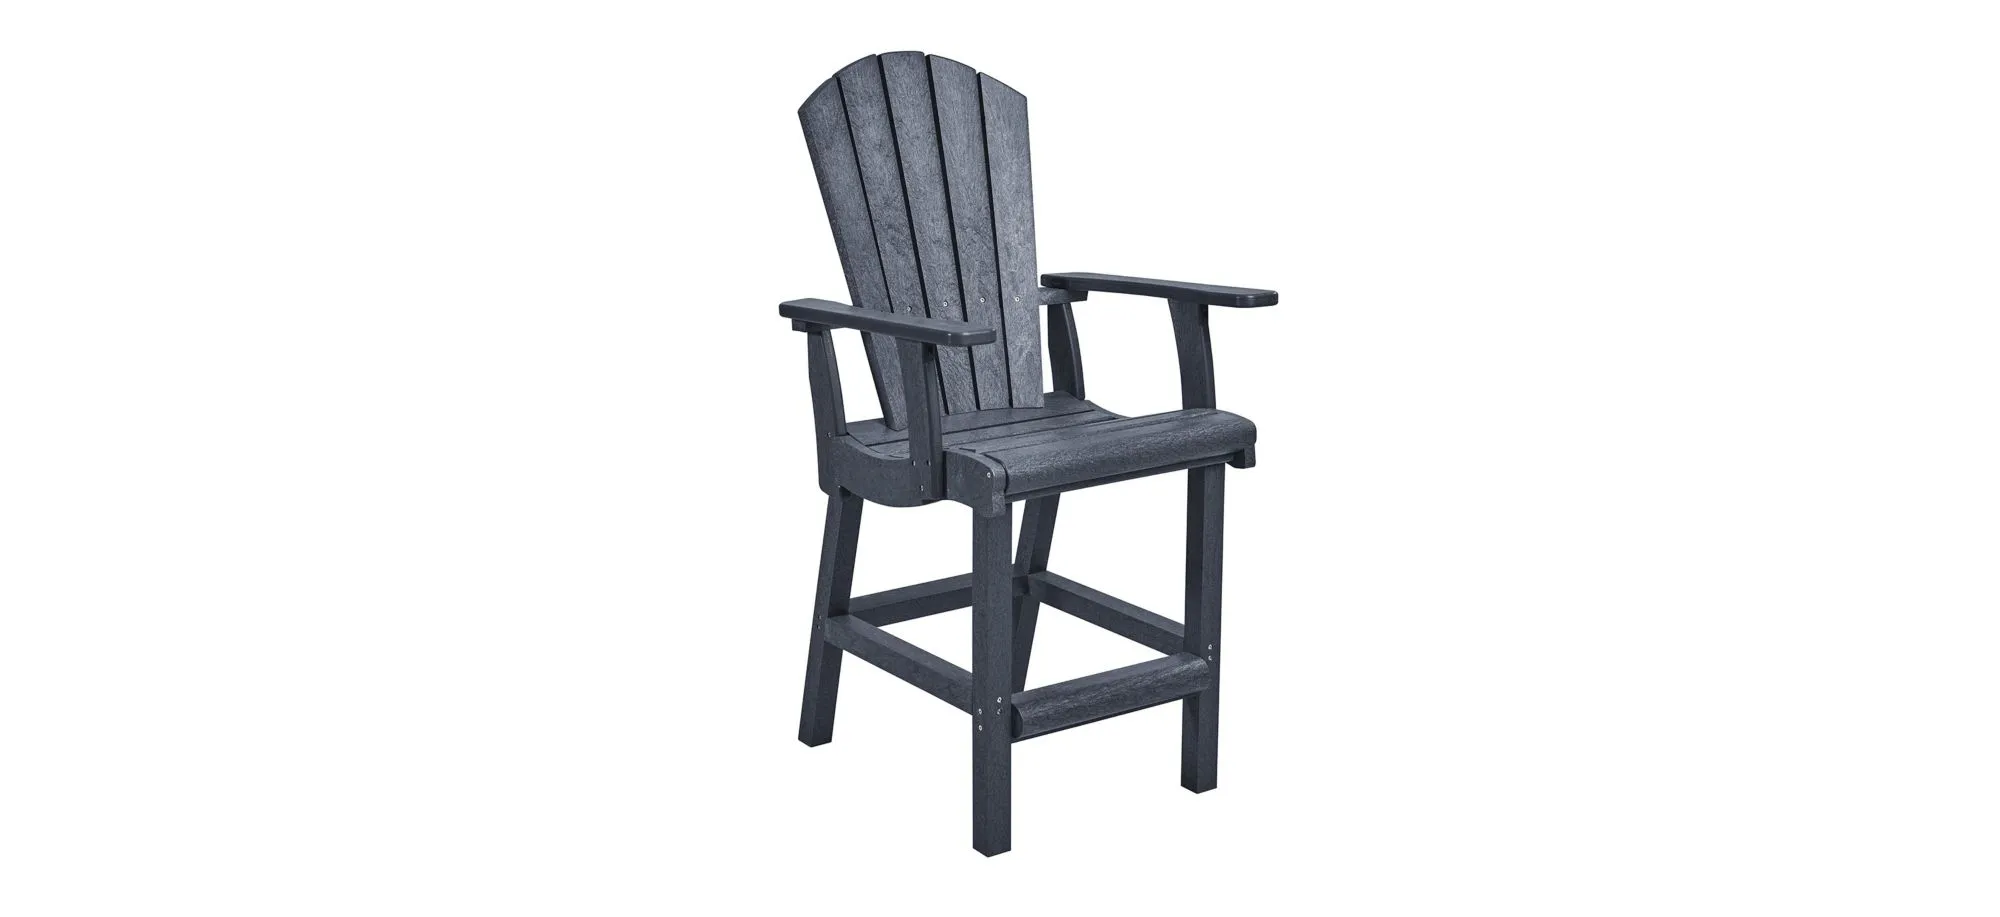 Generation Recycled Outdoor Counter Height Arm Chair in Slate Gray by C.R. Plastic Products